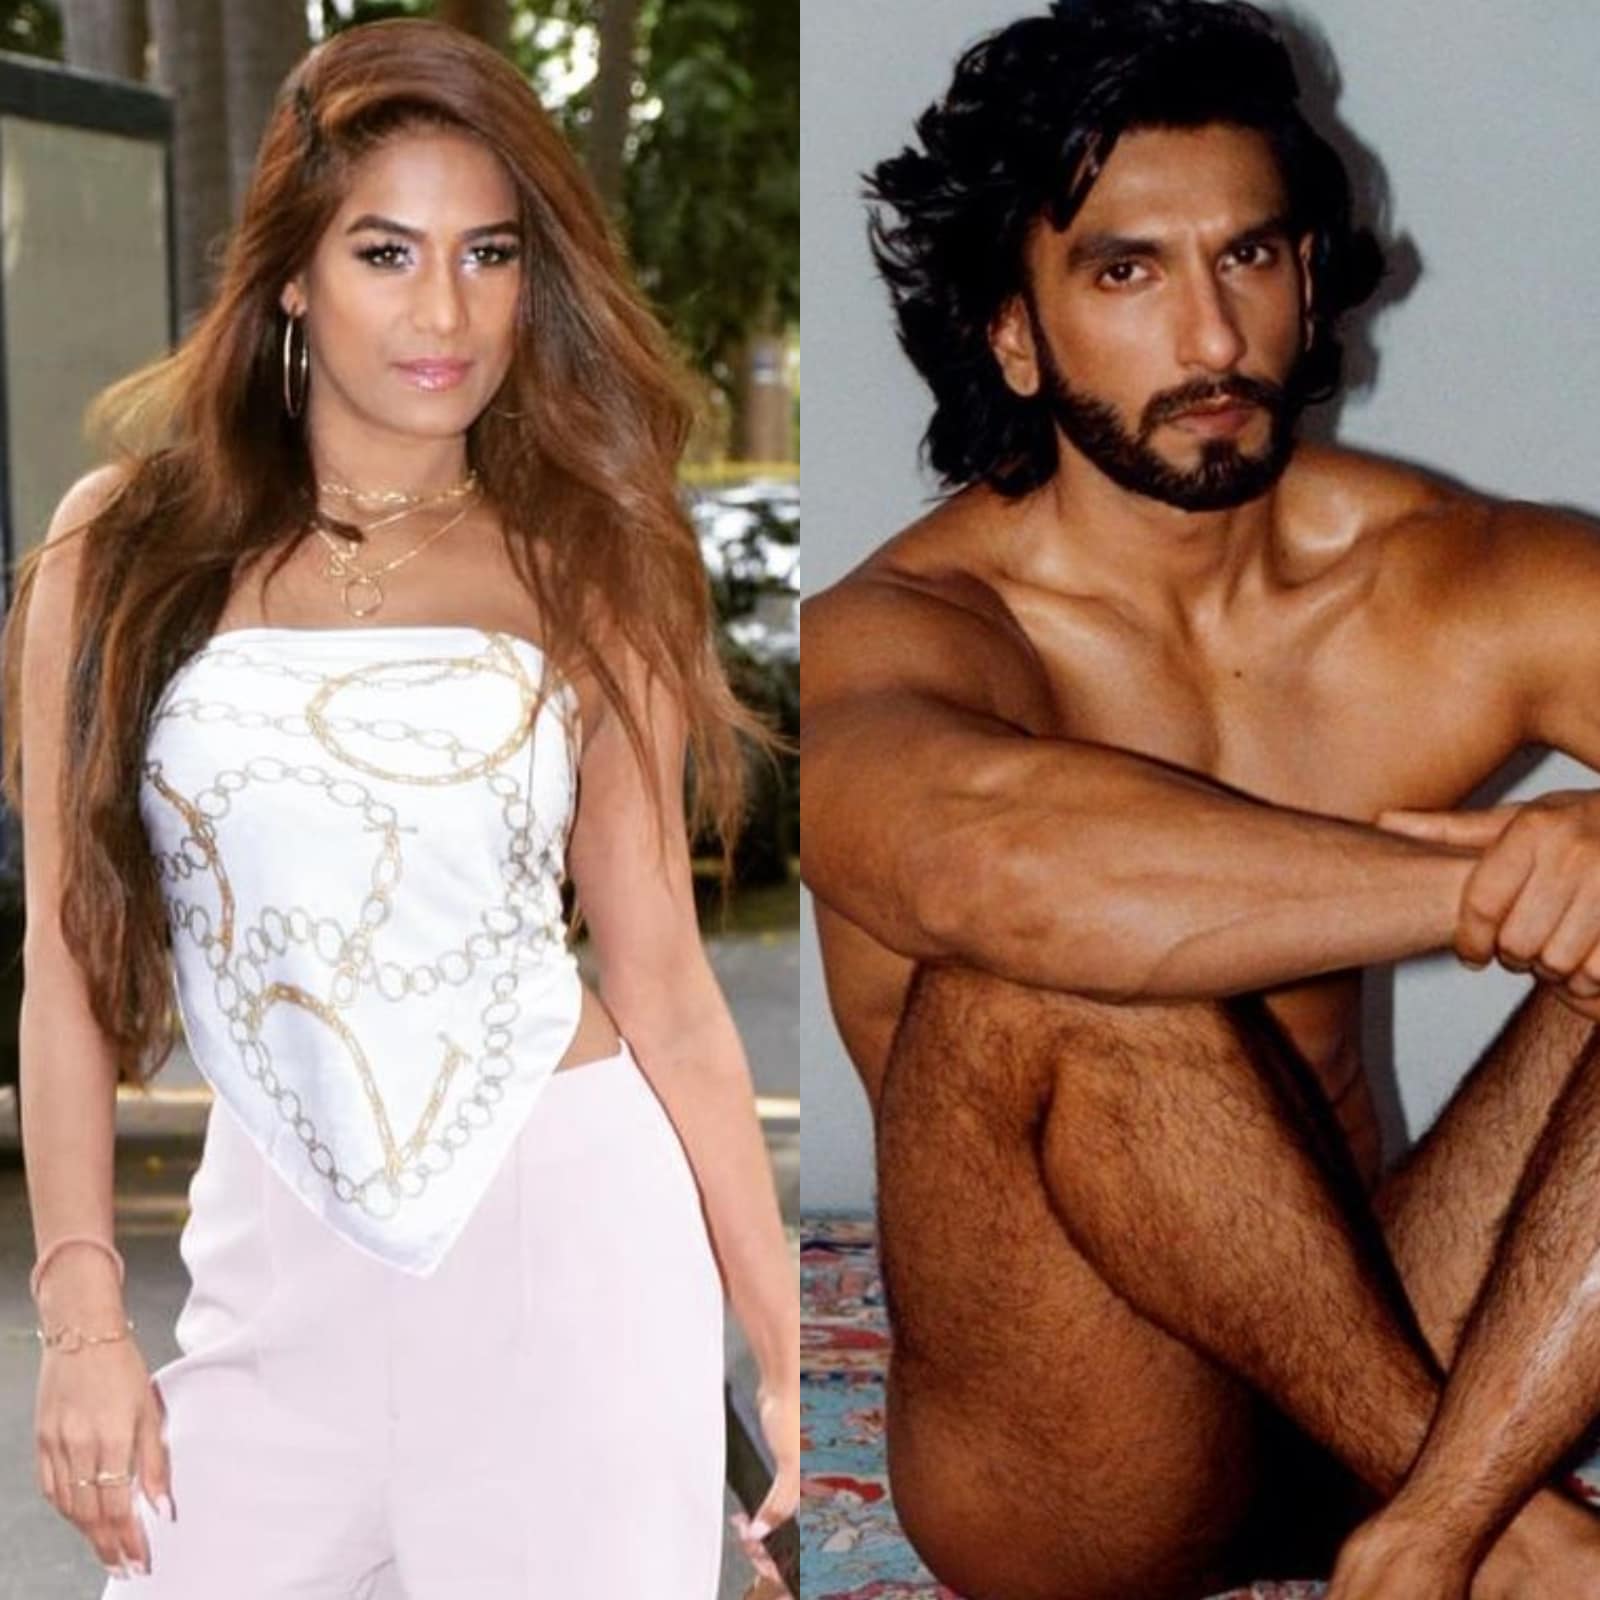 Poonam Xxx - Poonam Pandey in Shock Over Ranveer Singh Nude Photos Case: 'Don't Think  He's Committing Crime' - News18